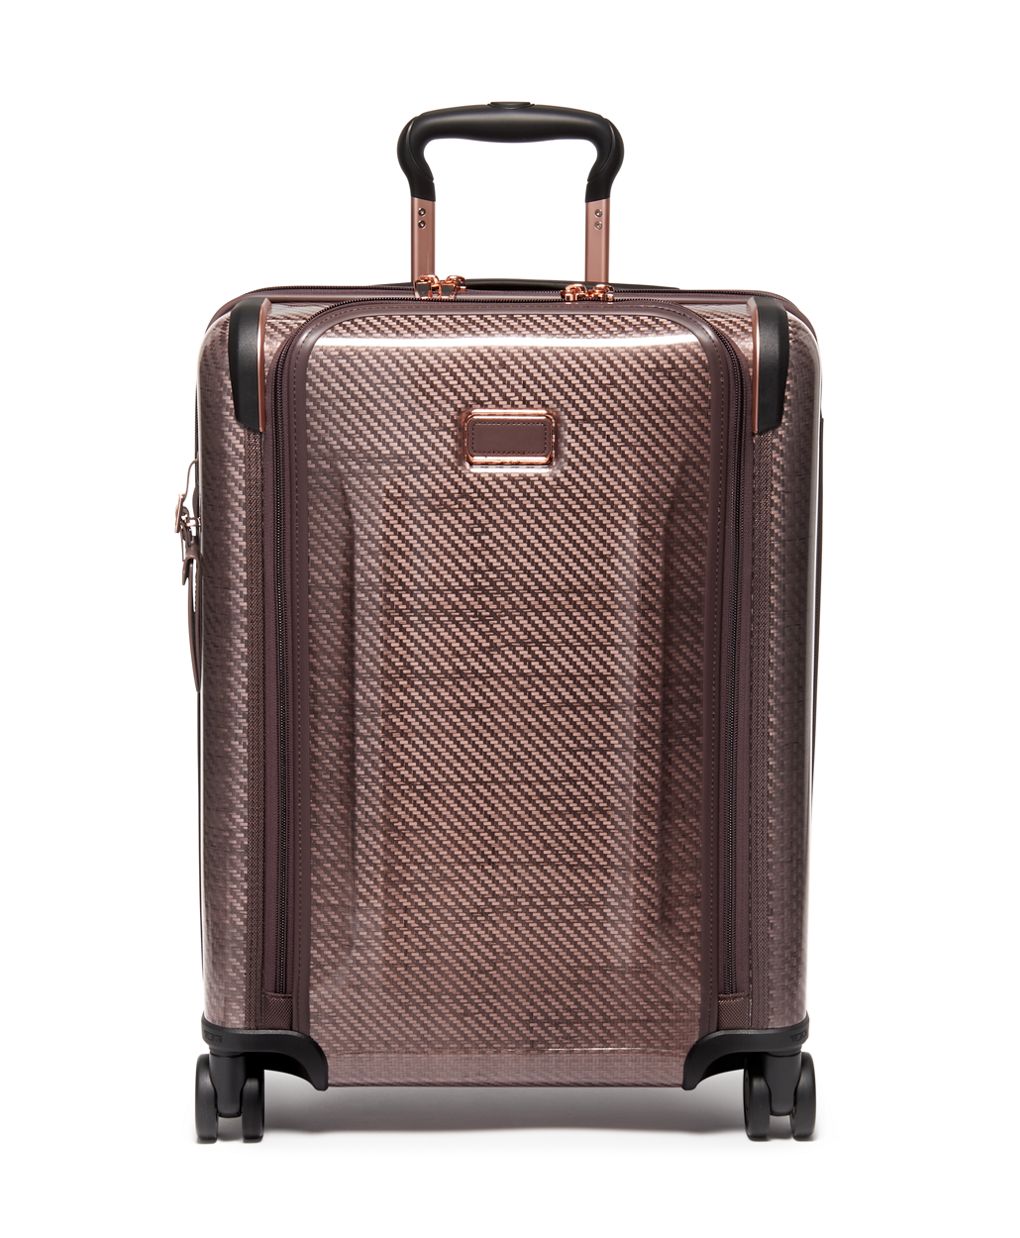 These Are The 6 Best Pieces Of Luggage To Buy For The Business Traveler In  Your Life | Essence